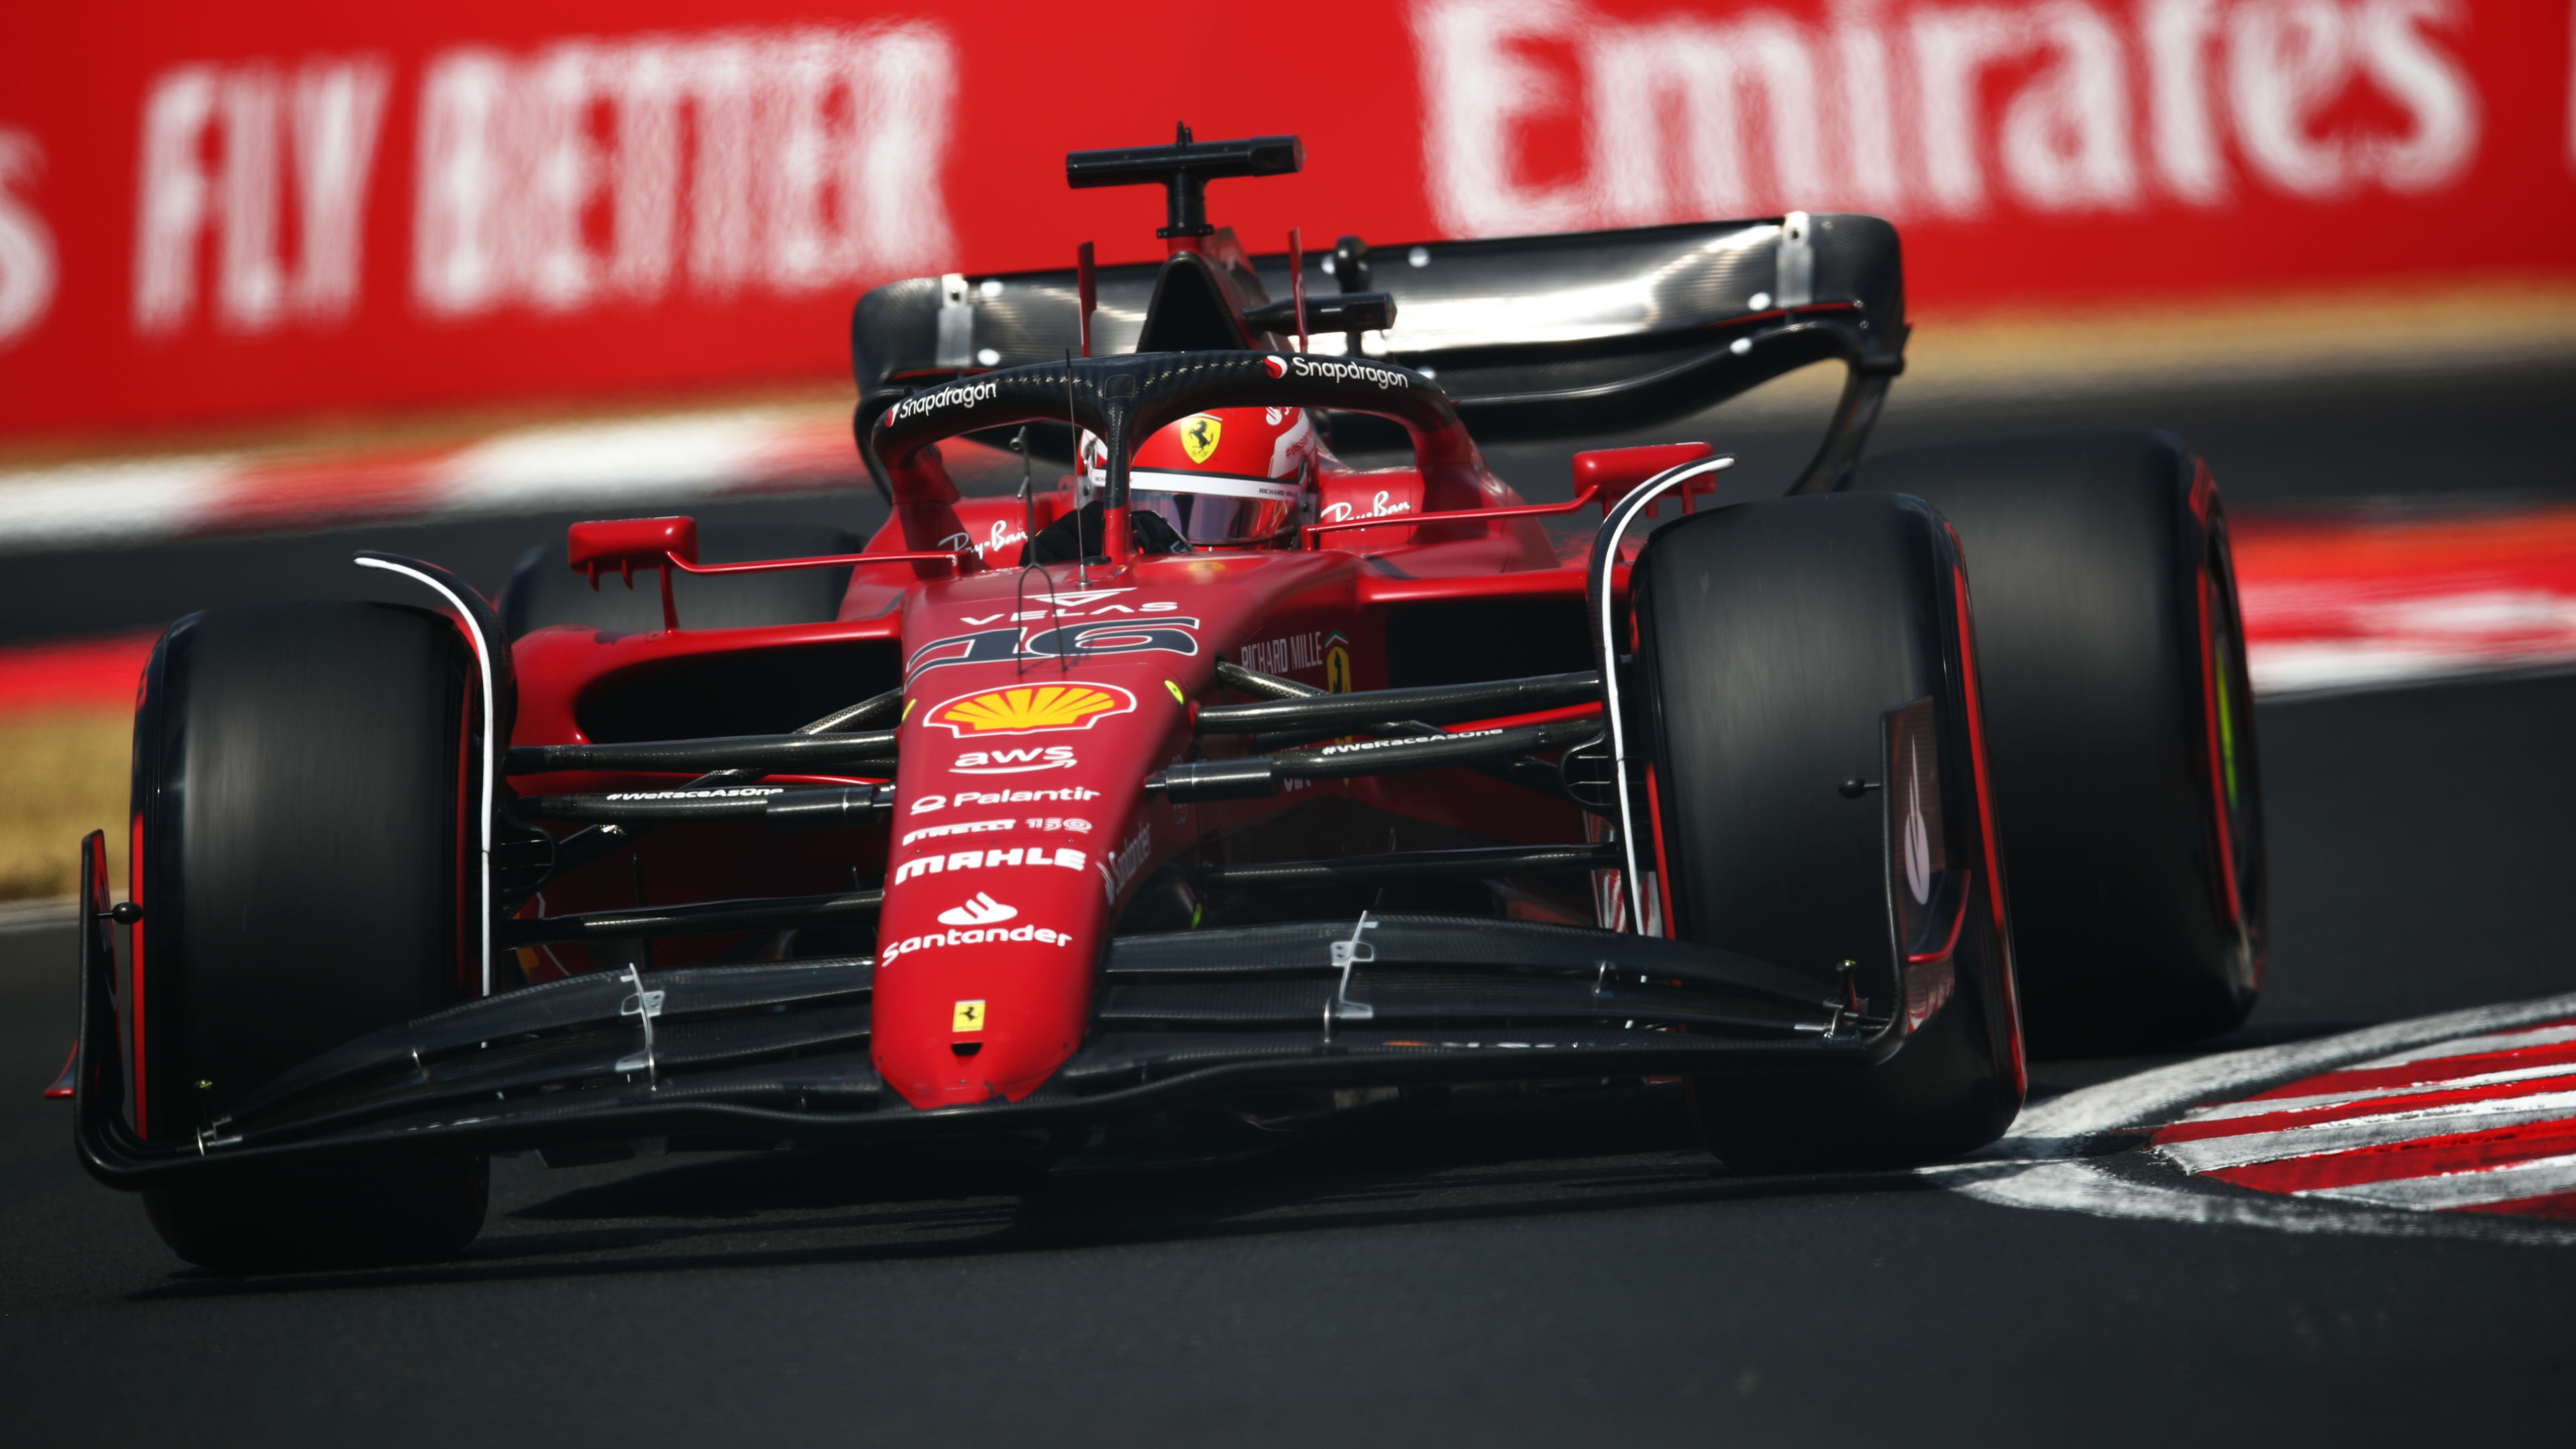 2022 Hungarian Grand Prix FP2 report and highlights FP2 Leclerc heads impressive Norris as Ferrari sweep Friday sessions at the Hungaroring Formula 1®